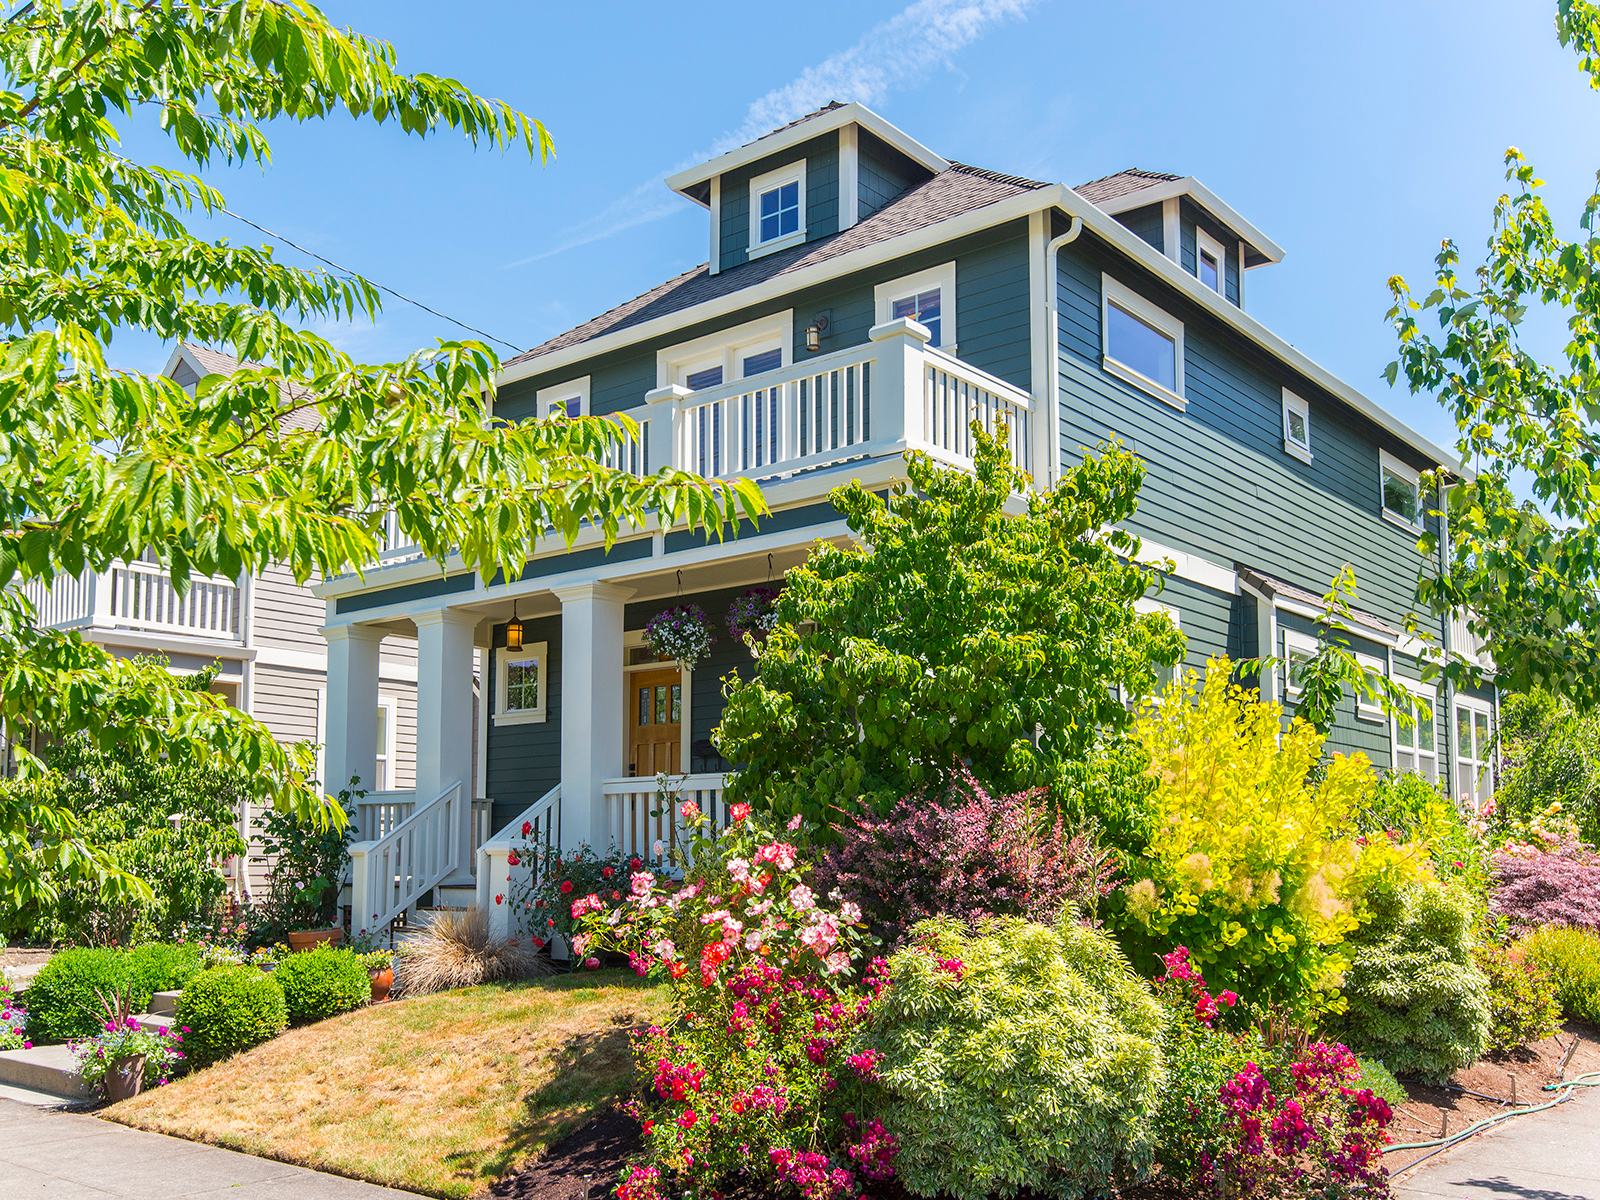 enhance your home's curb appeal to bring in multiple offers